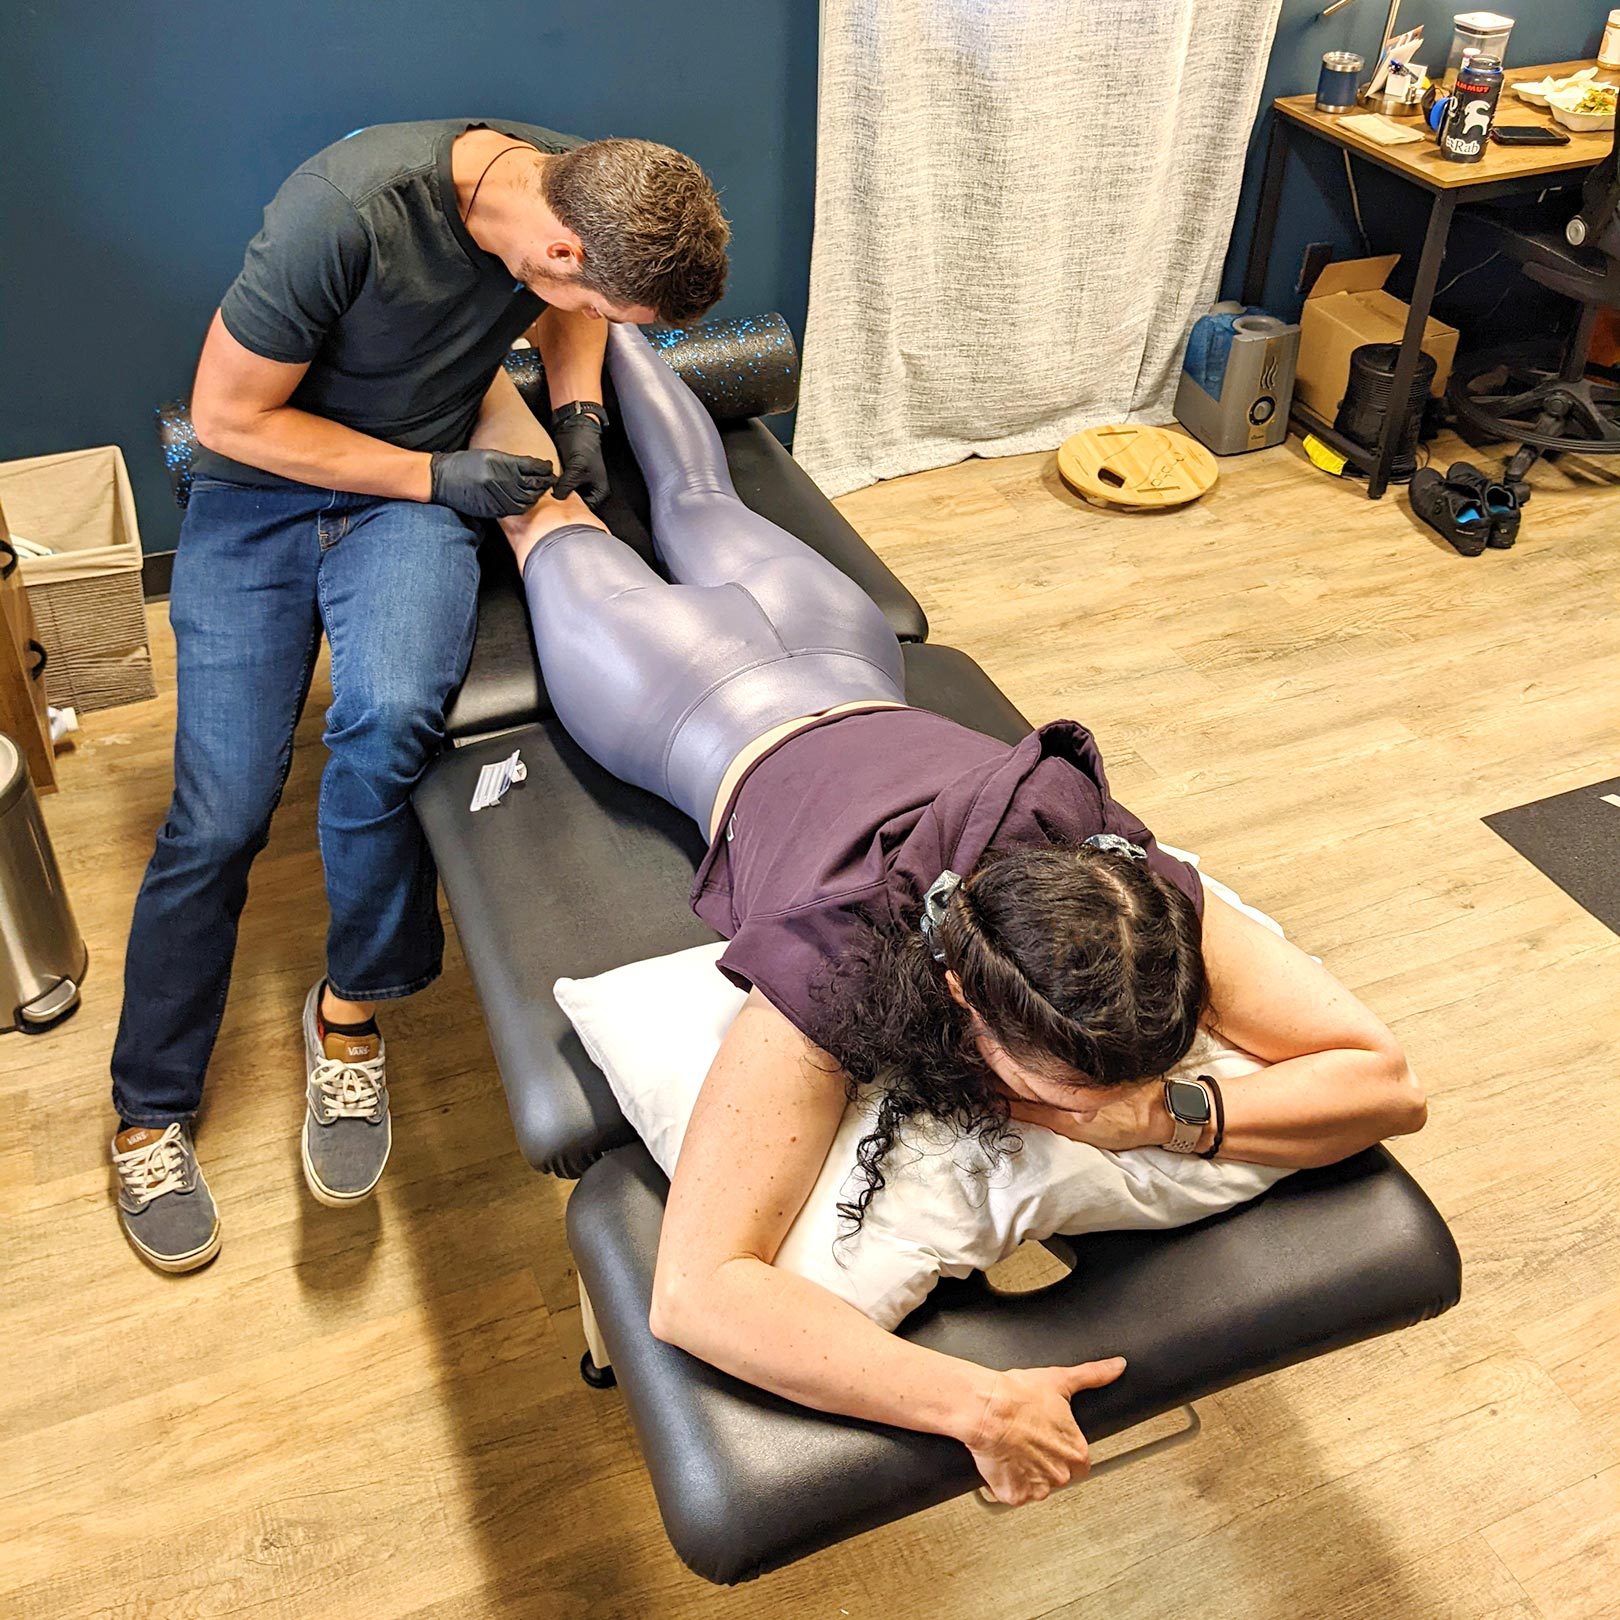 Dry Needling for Pain Relief: 'I Tried It'